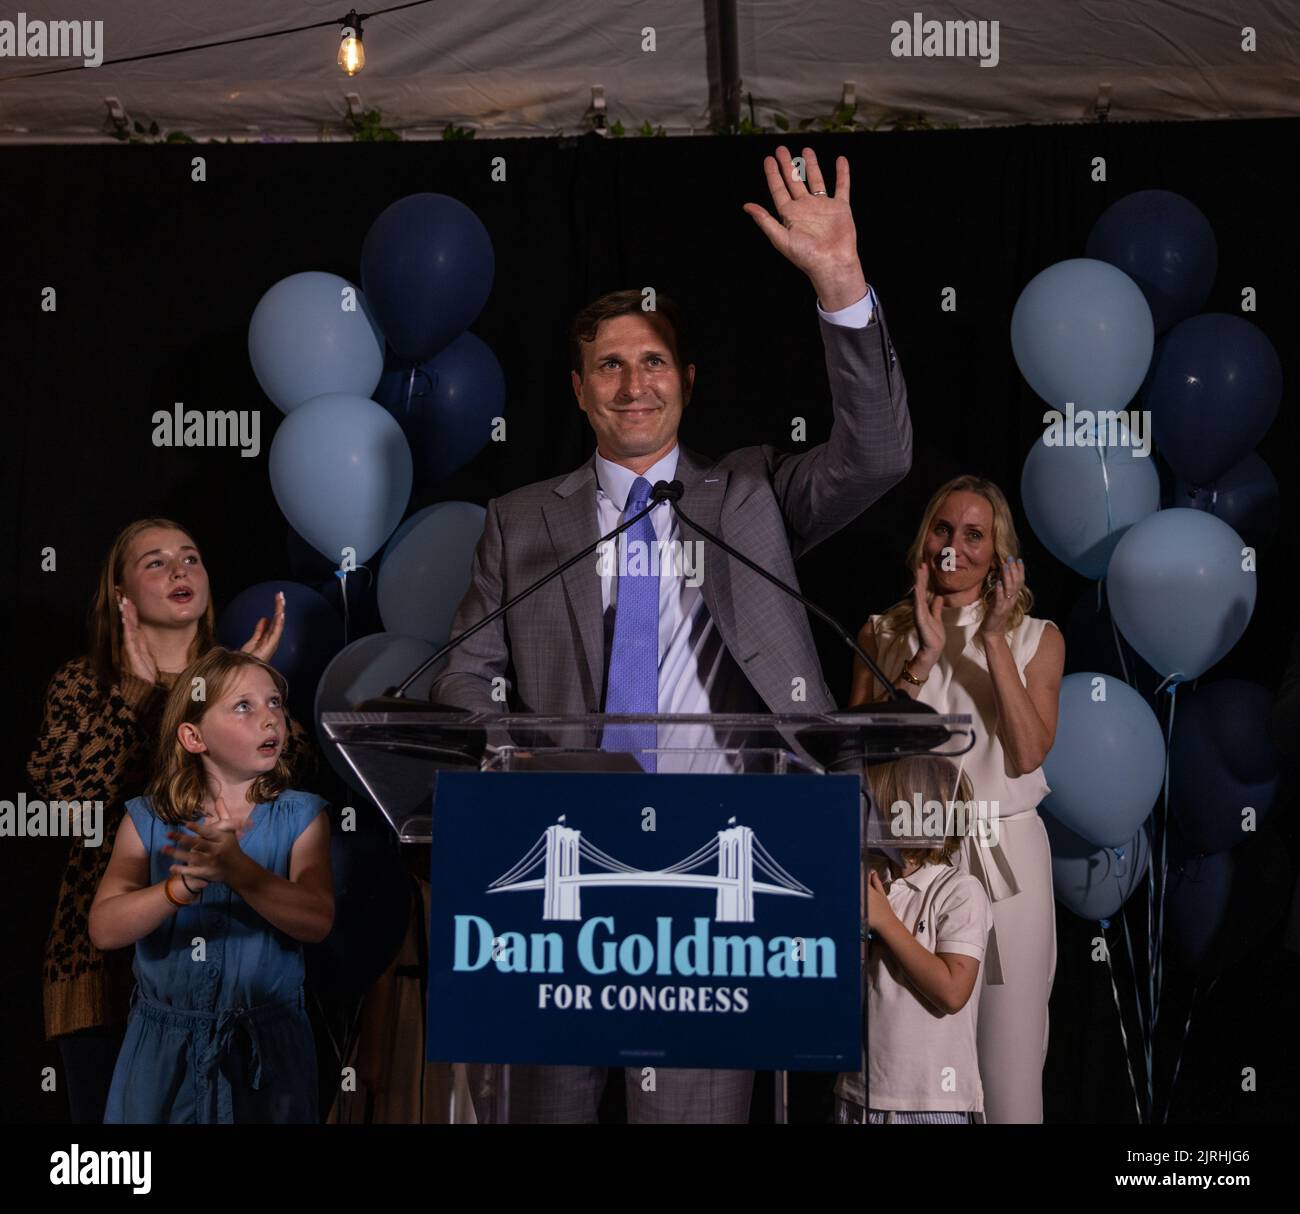 NEW YORK, N.Y. – August 23, 2022: Democratic congressional candidate Dan Goldman addresses supporters during his primary election night watch party. Stock Photo